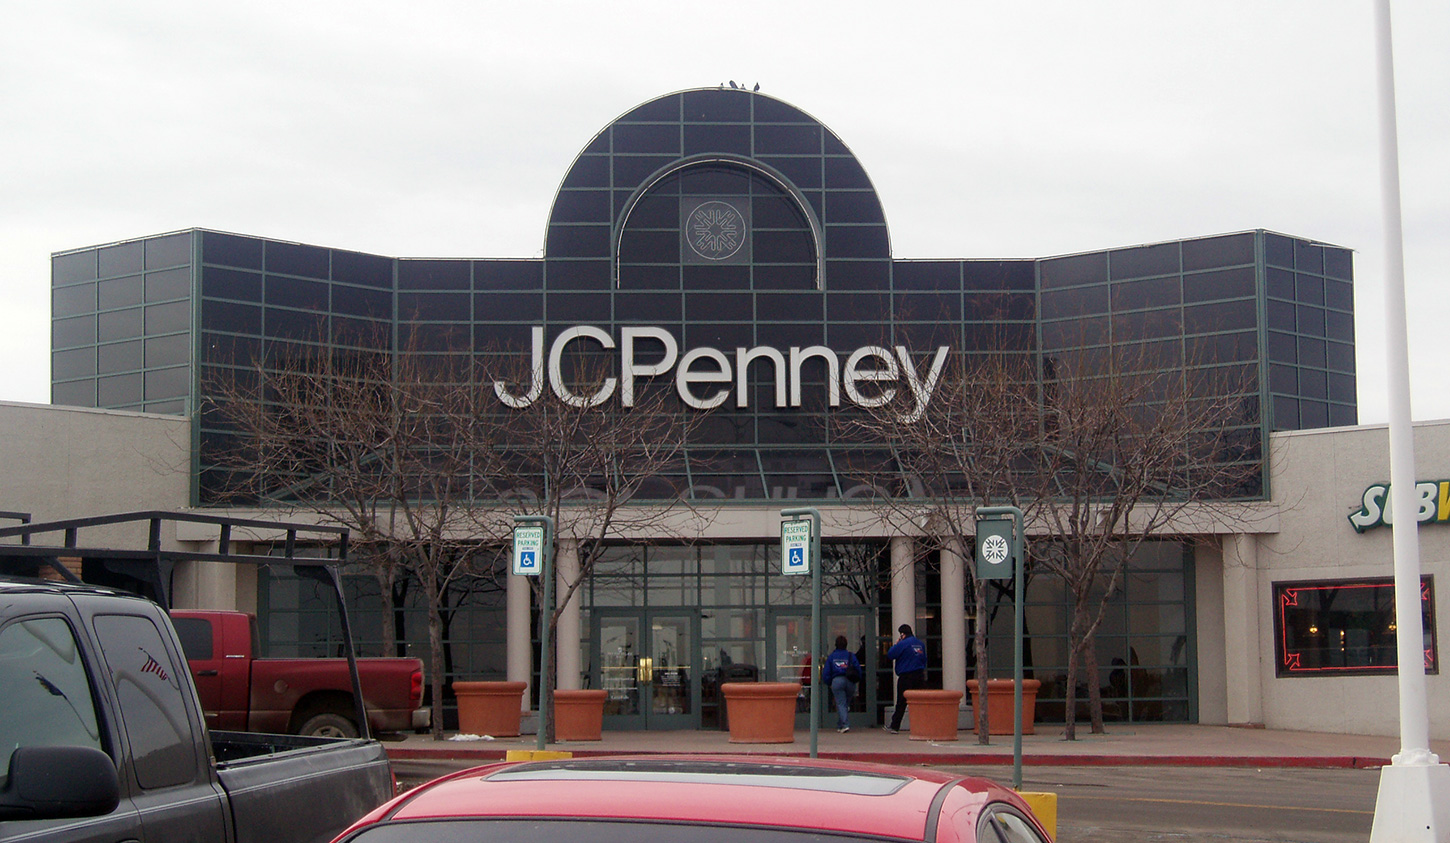 JCPenney in the Holiday Village Mall in Great Falls, Montana in June 2007